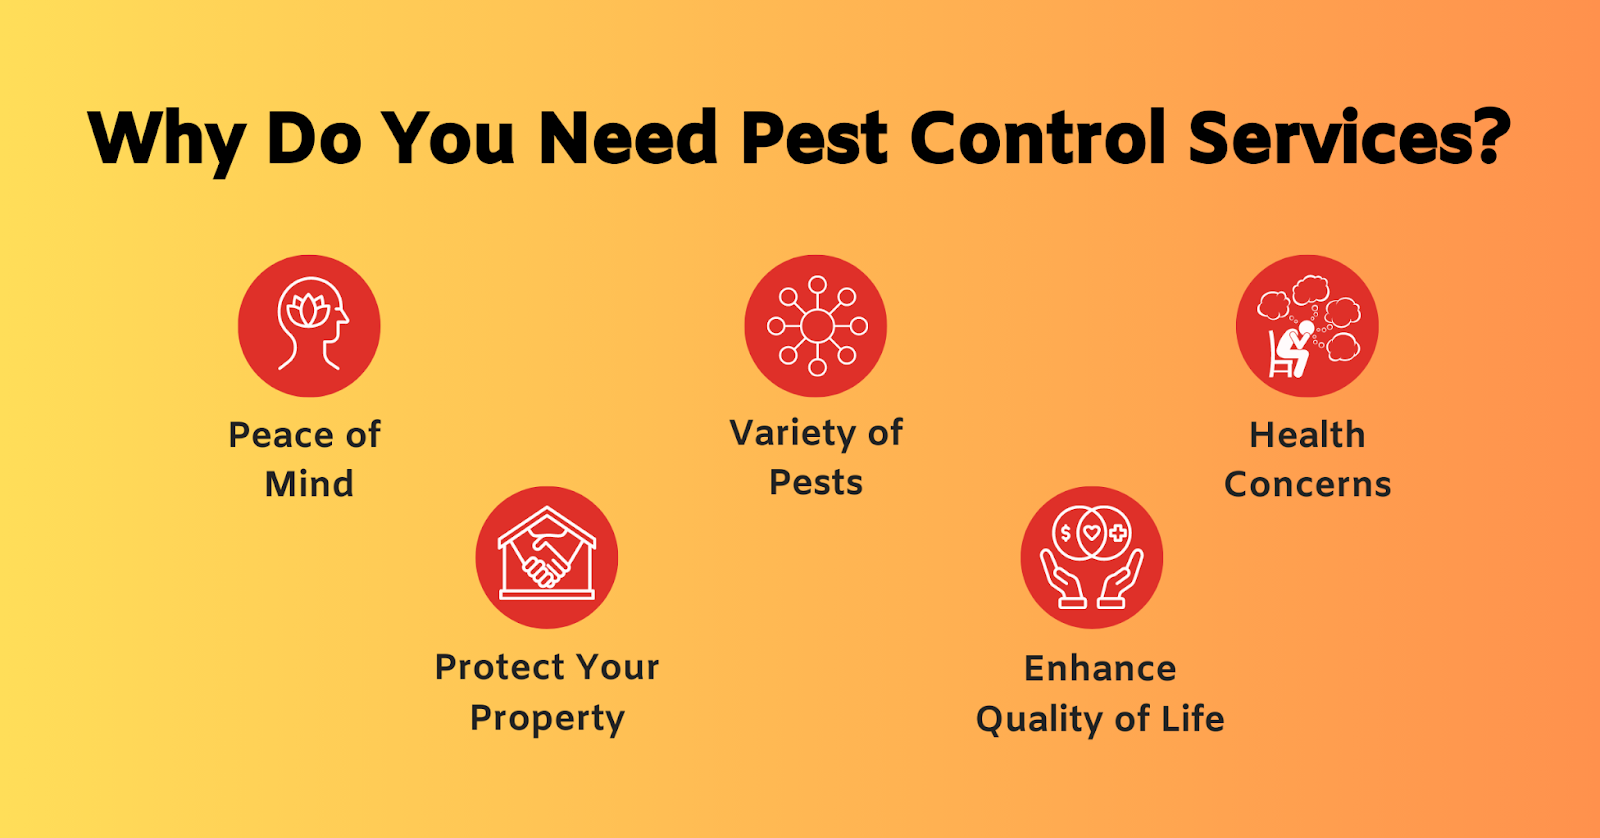 Why Do You Need Pest Control Services